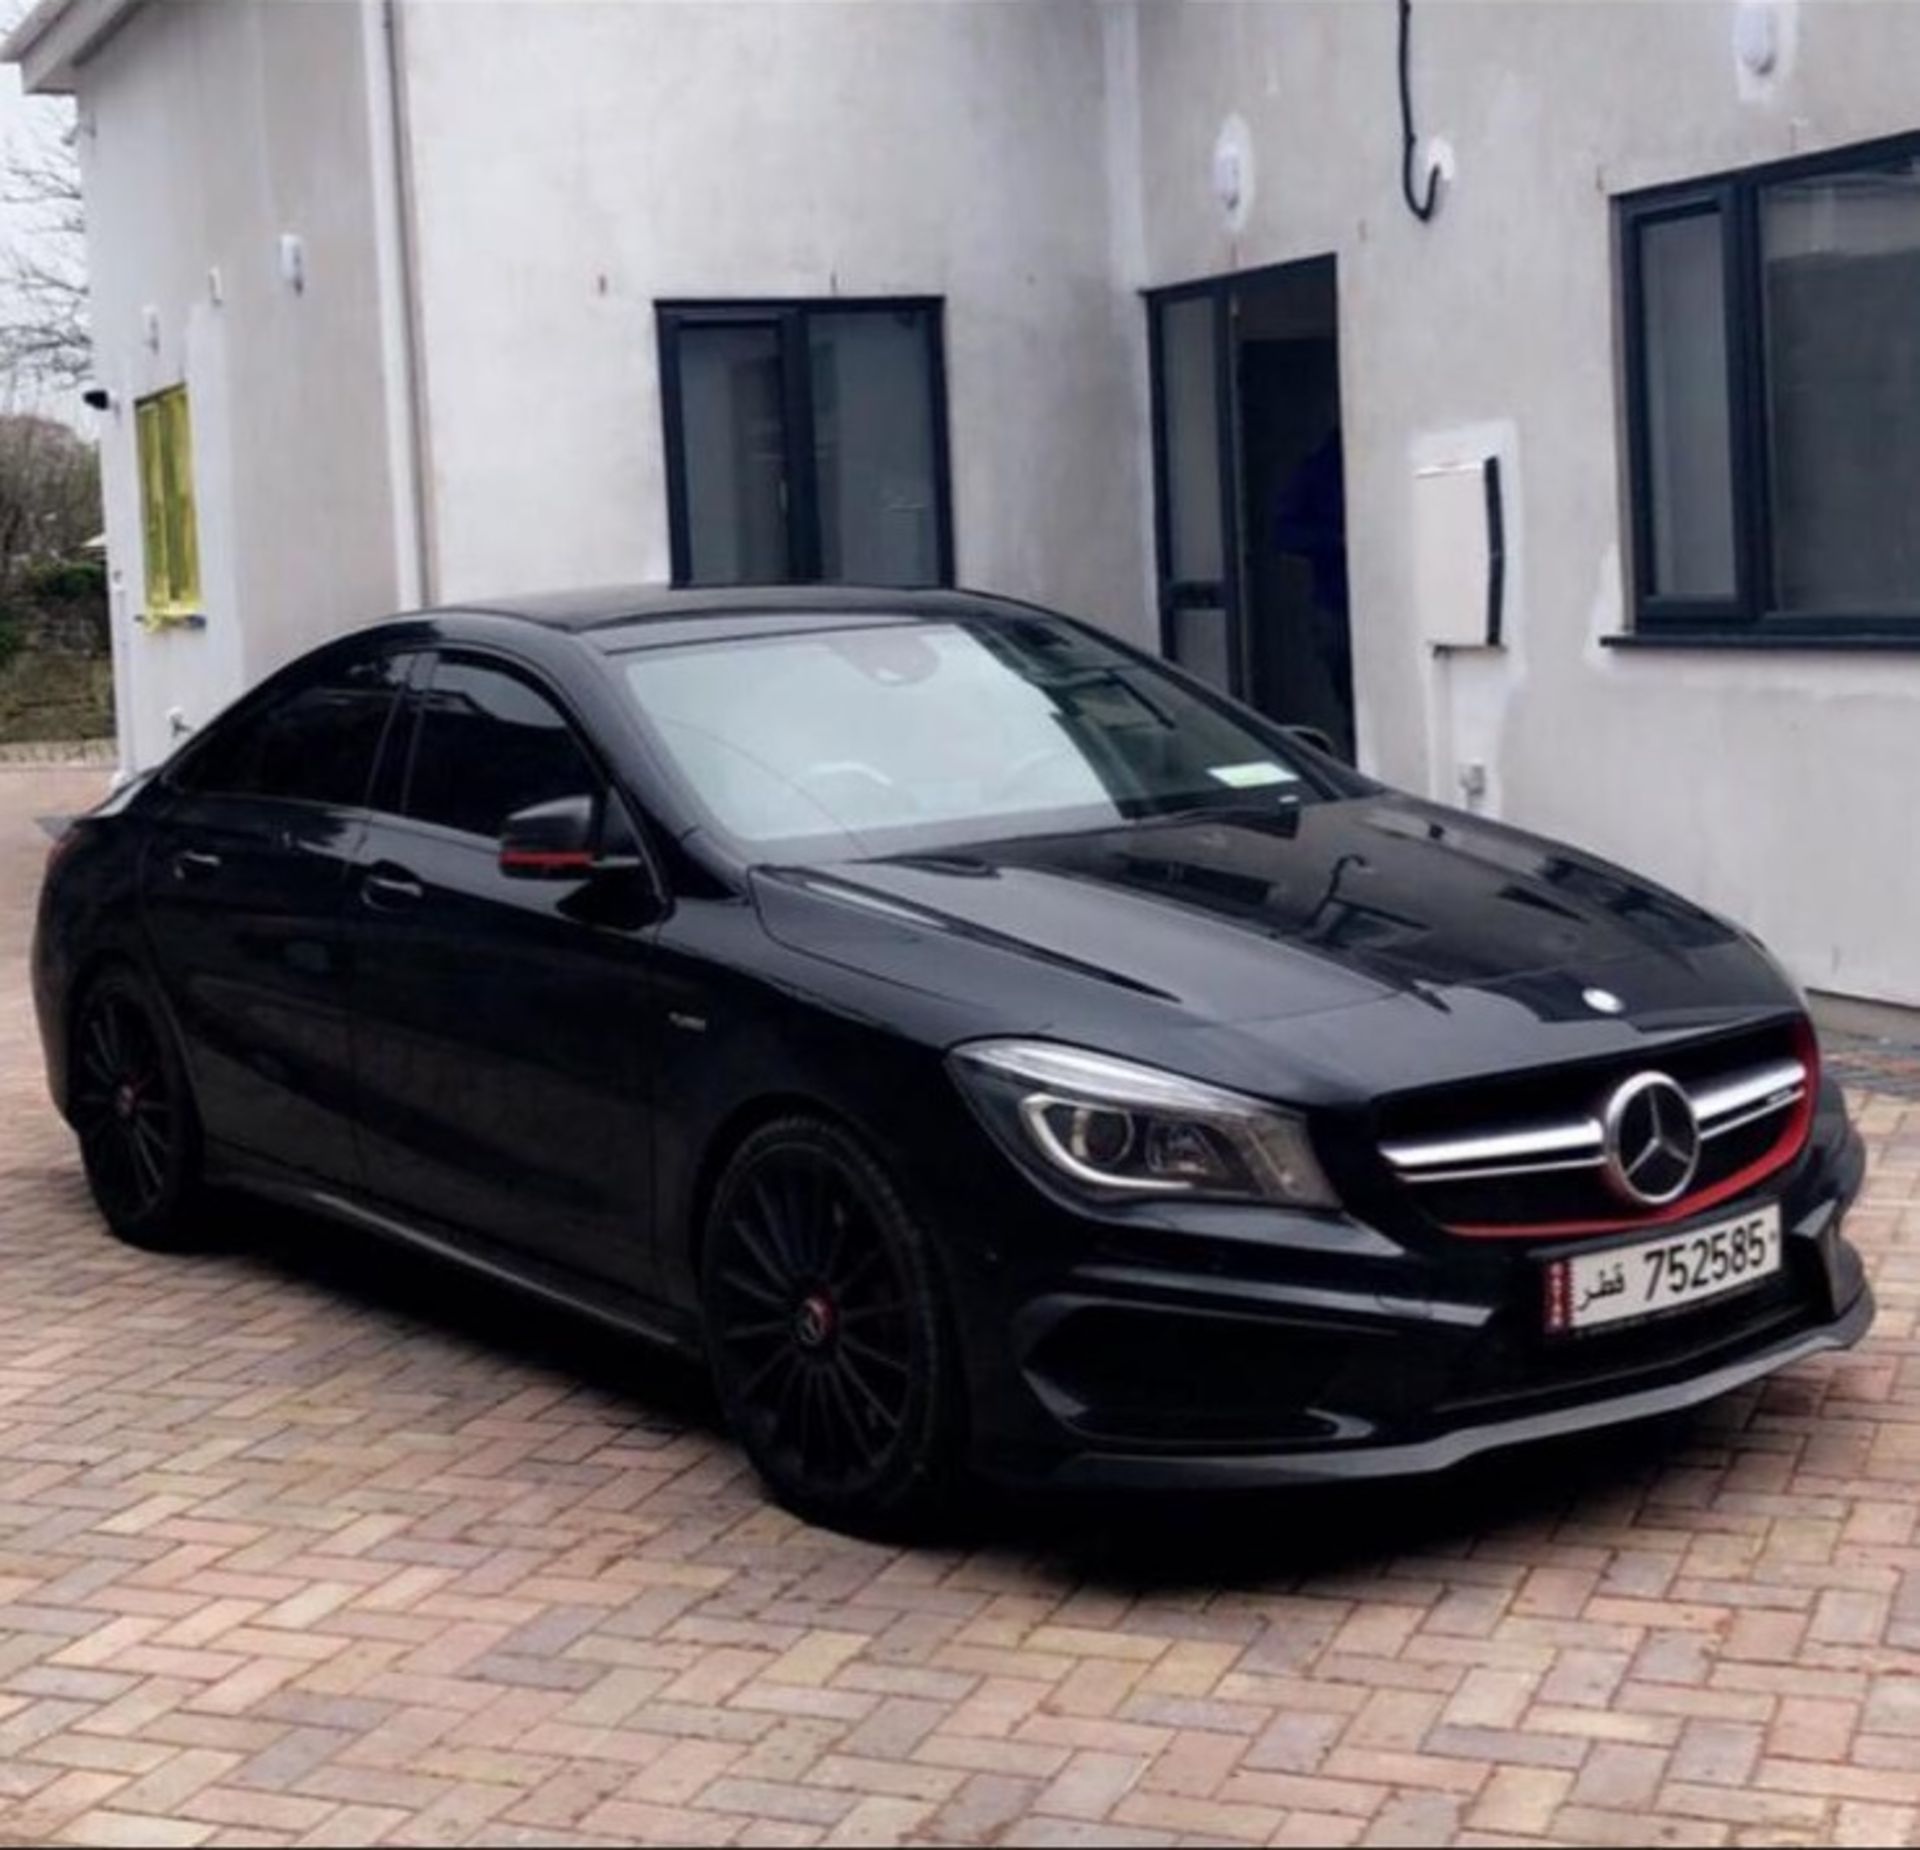 RARE 2015 MERCEDES-BENZ CLA45 AMG 4 MATIC SPECIAL EDITION 1, 355 BHP, 40,000KM / 25,000 MILES